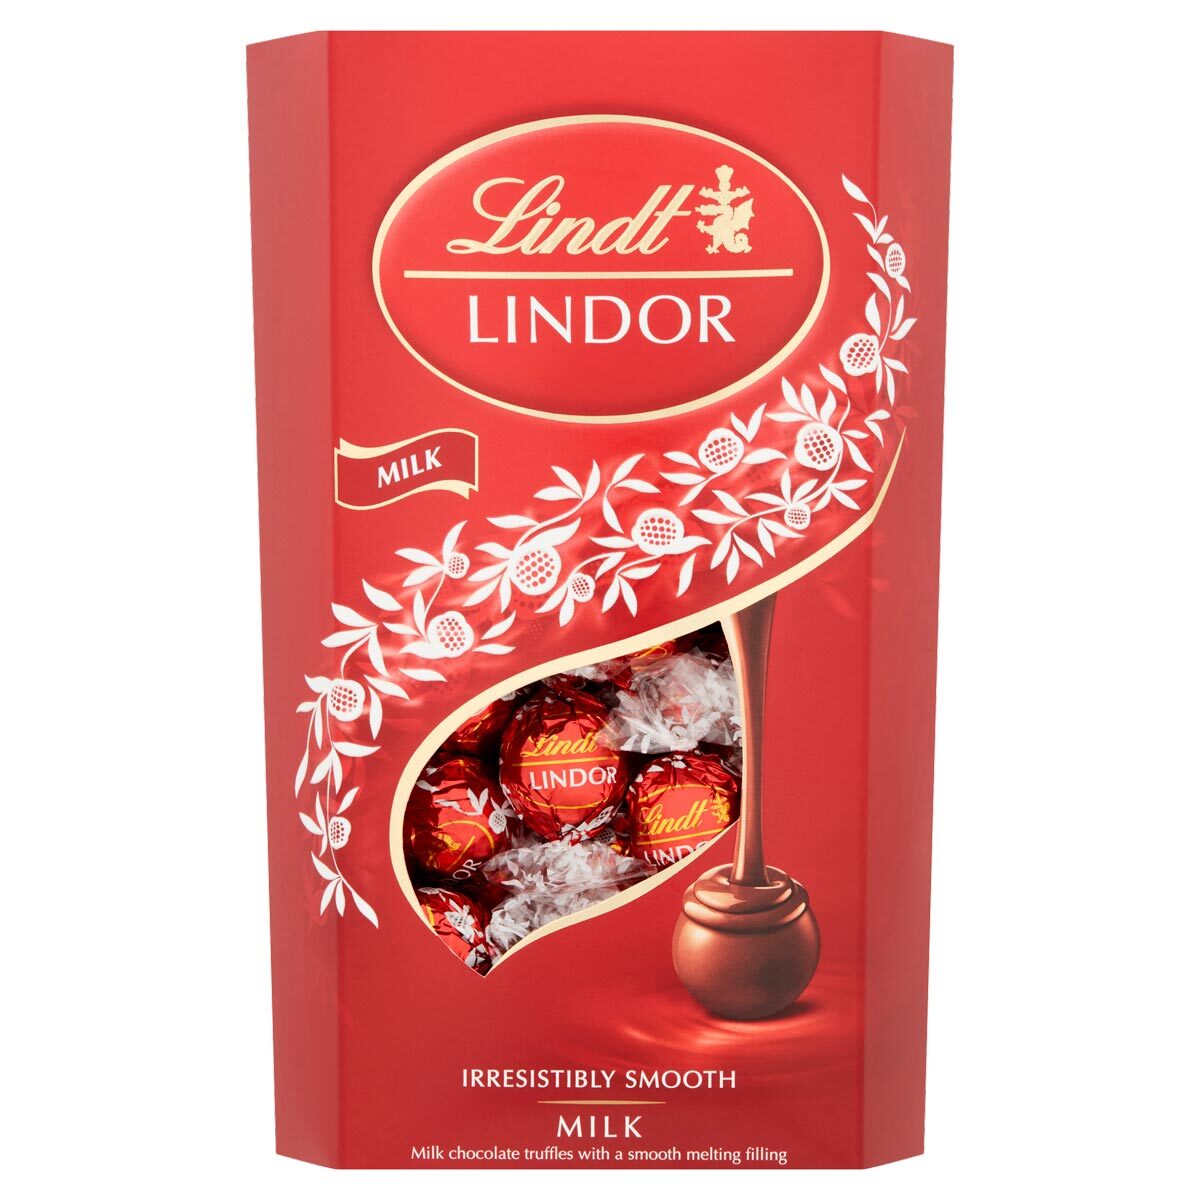 Red box of chocs with window showing individually wrapped red chocolates